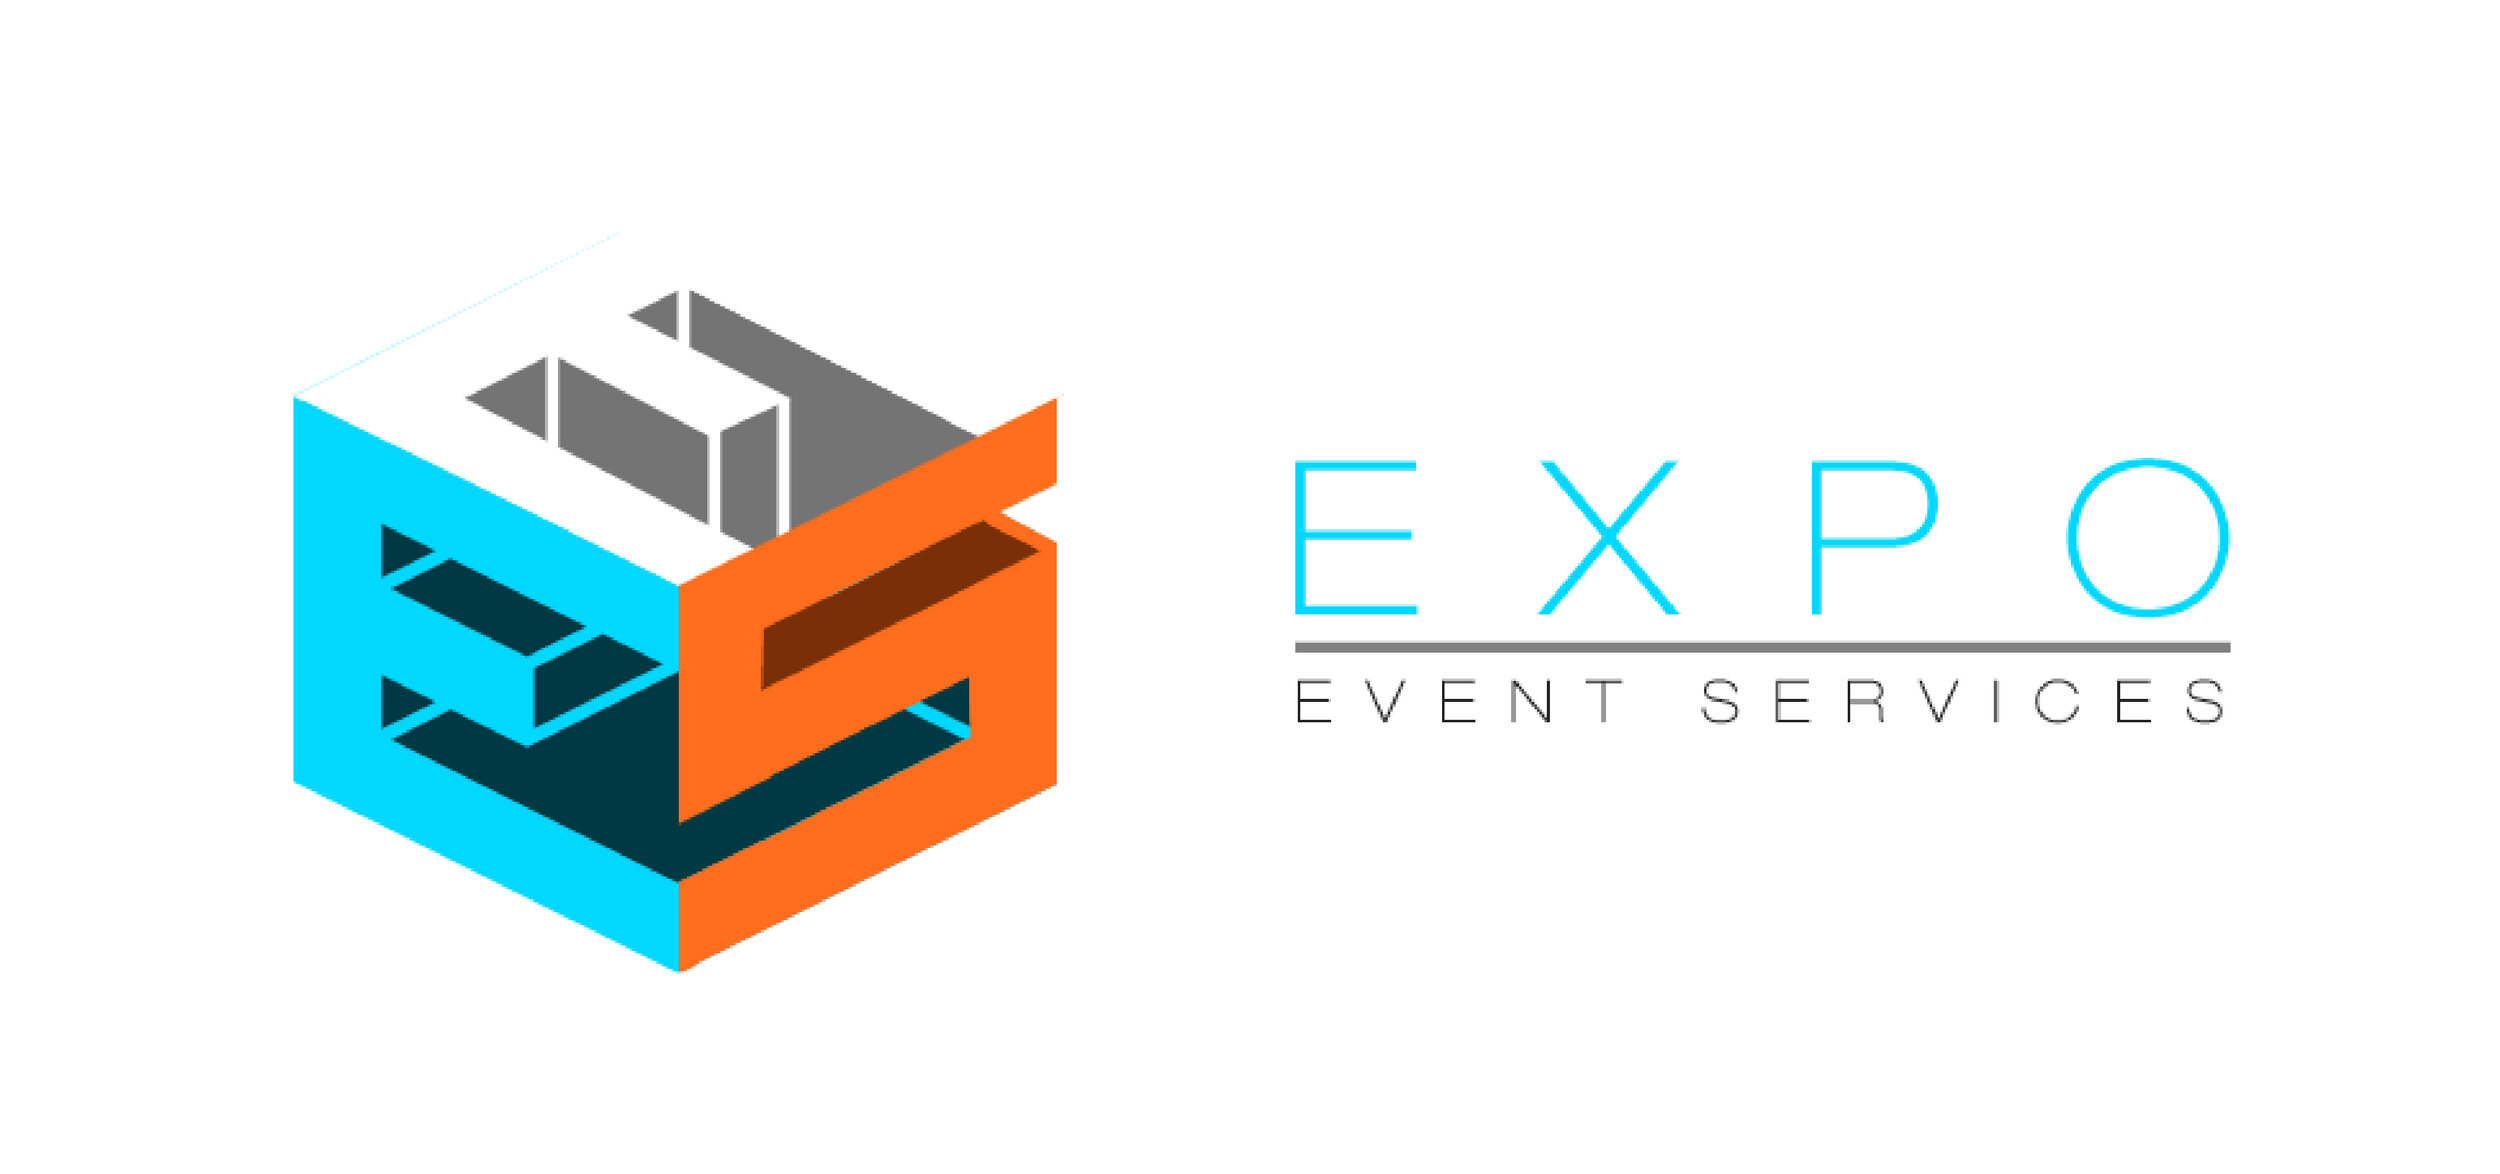 EXPO EVENT SERVICES